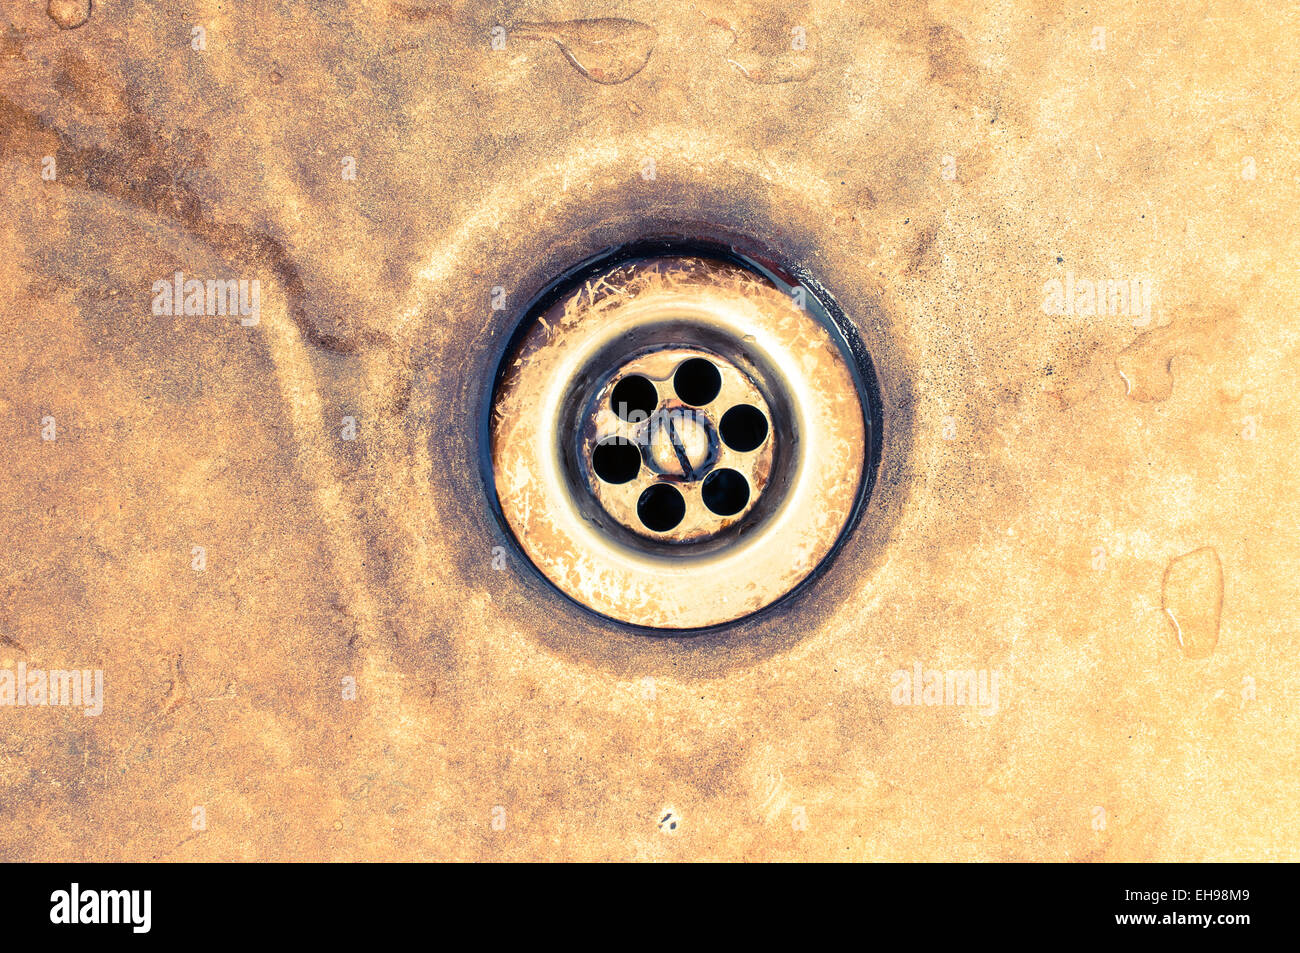 Drain Old Rusty Sink For Background Stock Photo 79495033